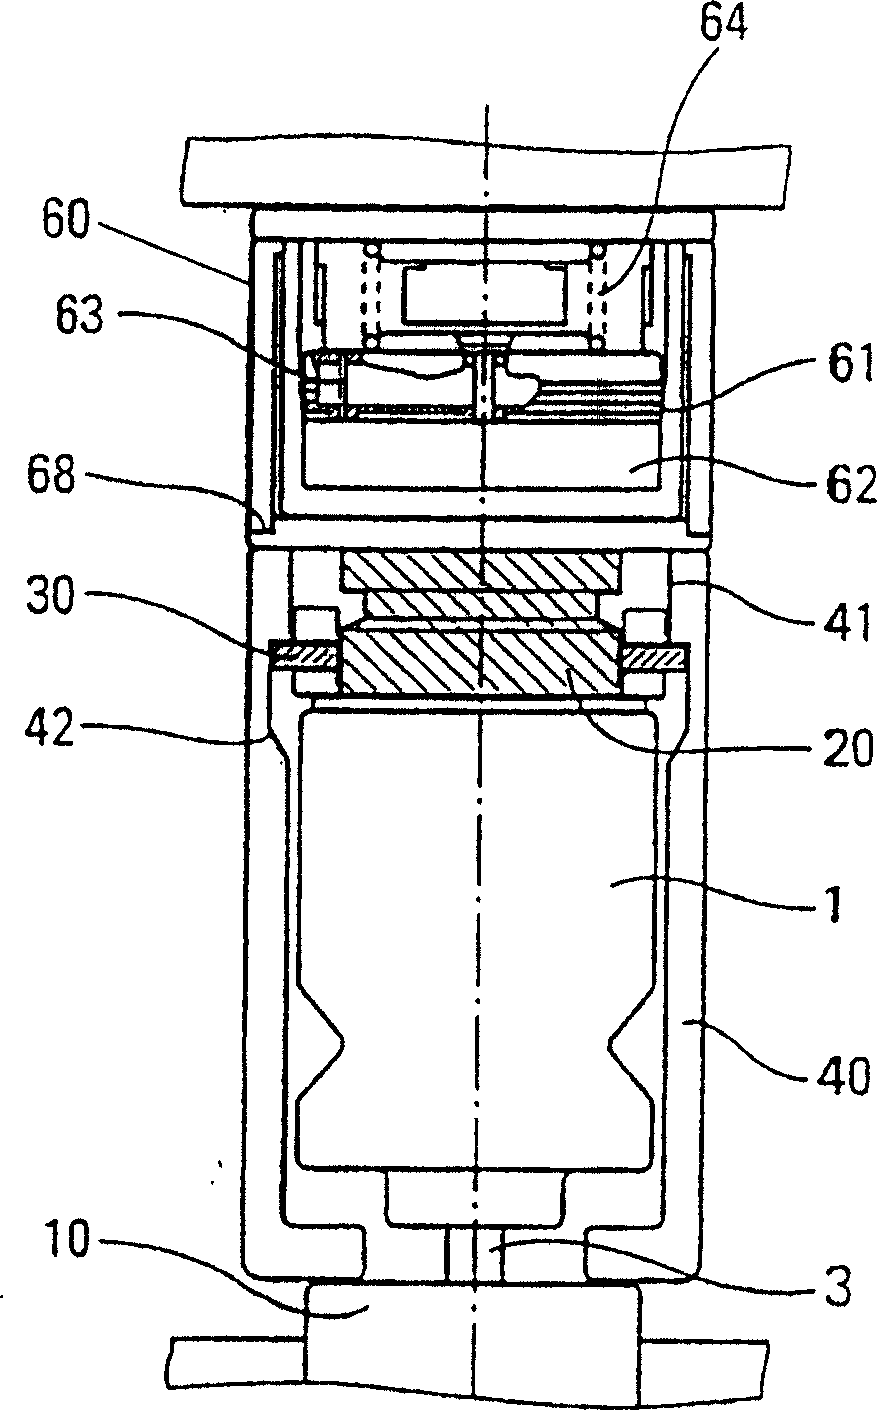 Fluid product dispensing device